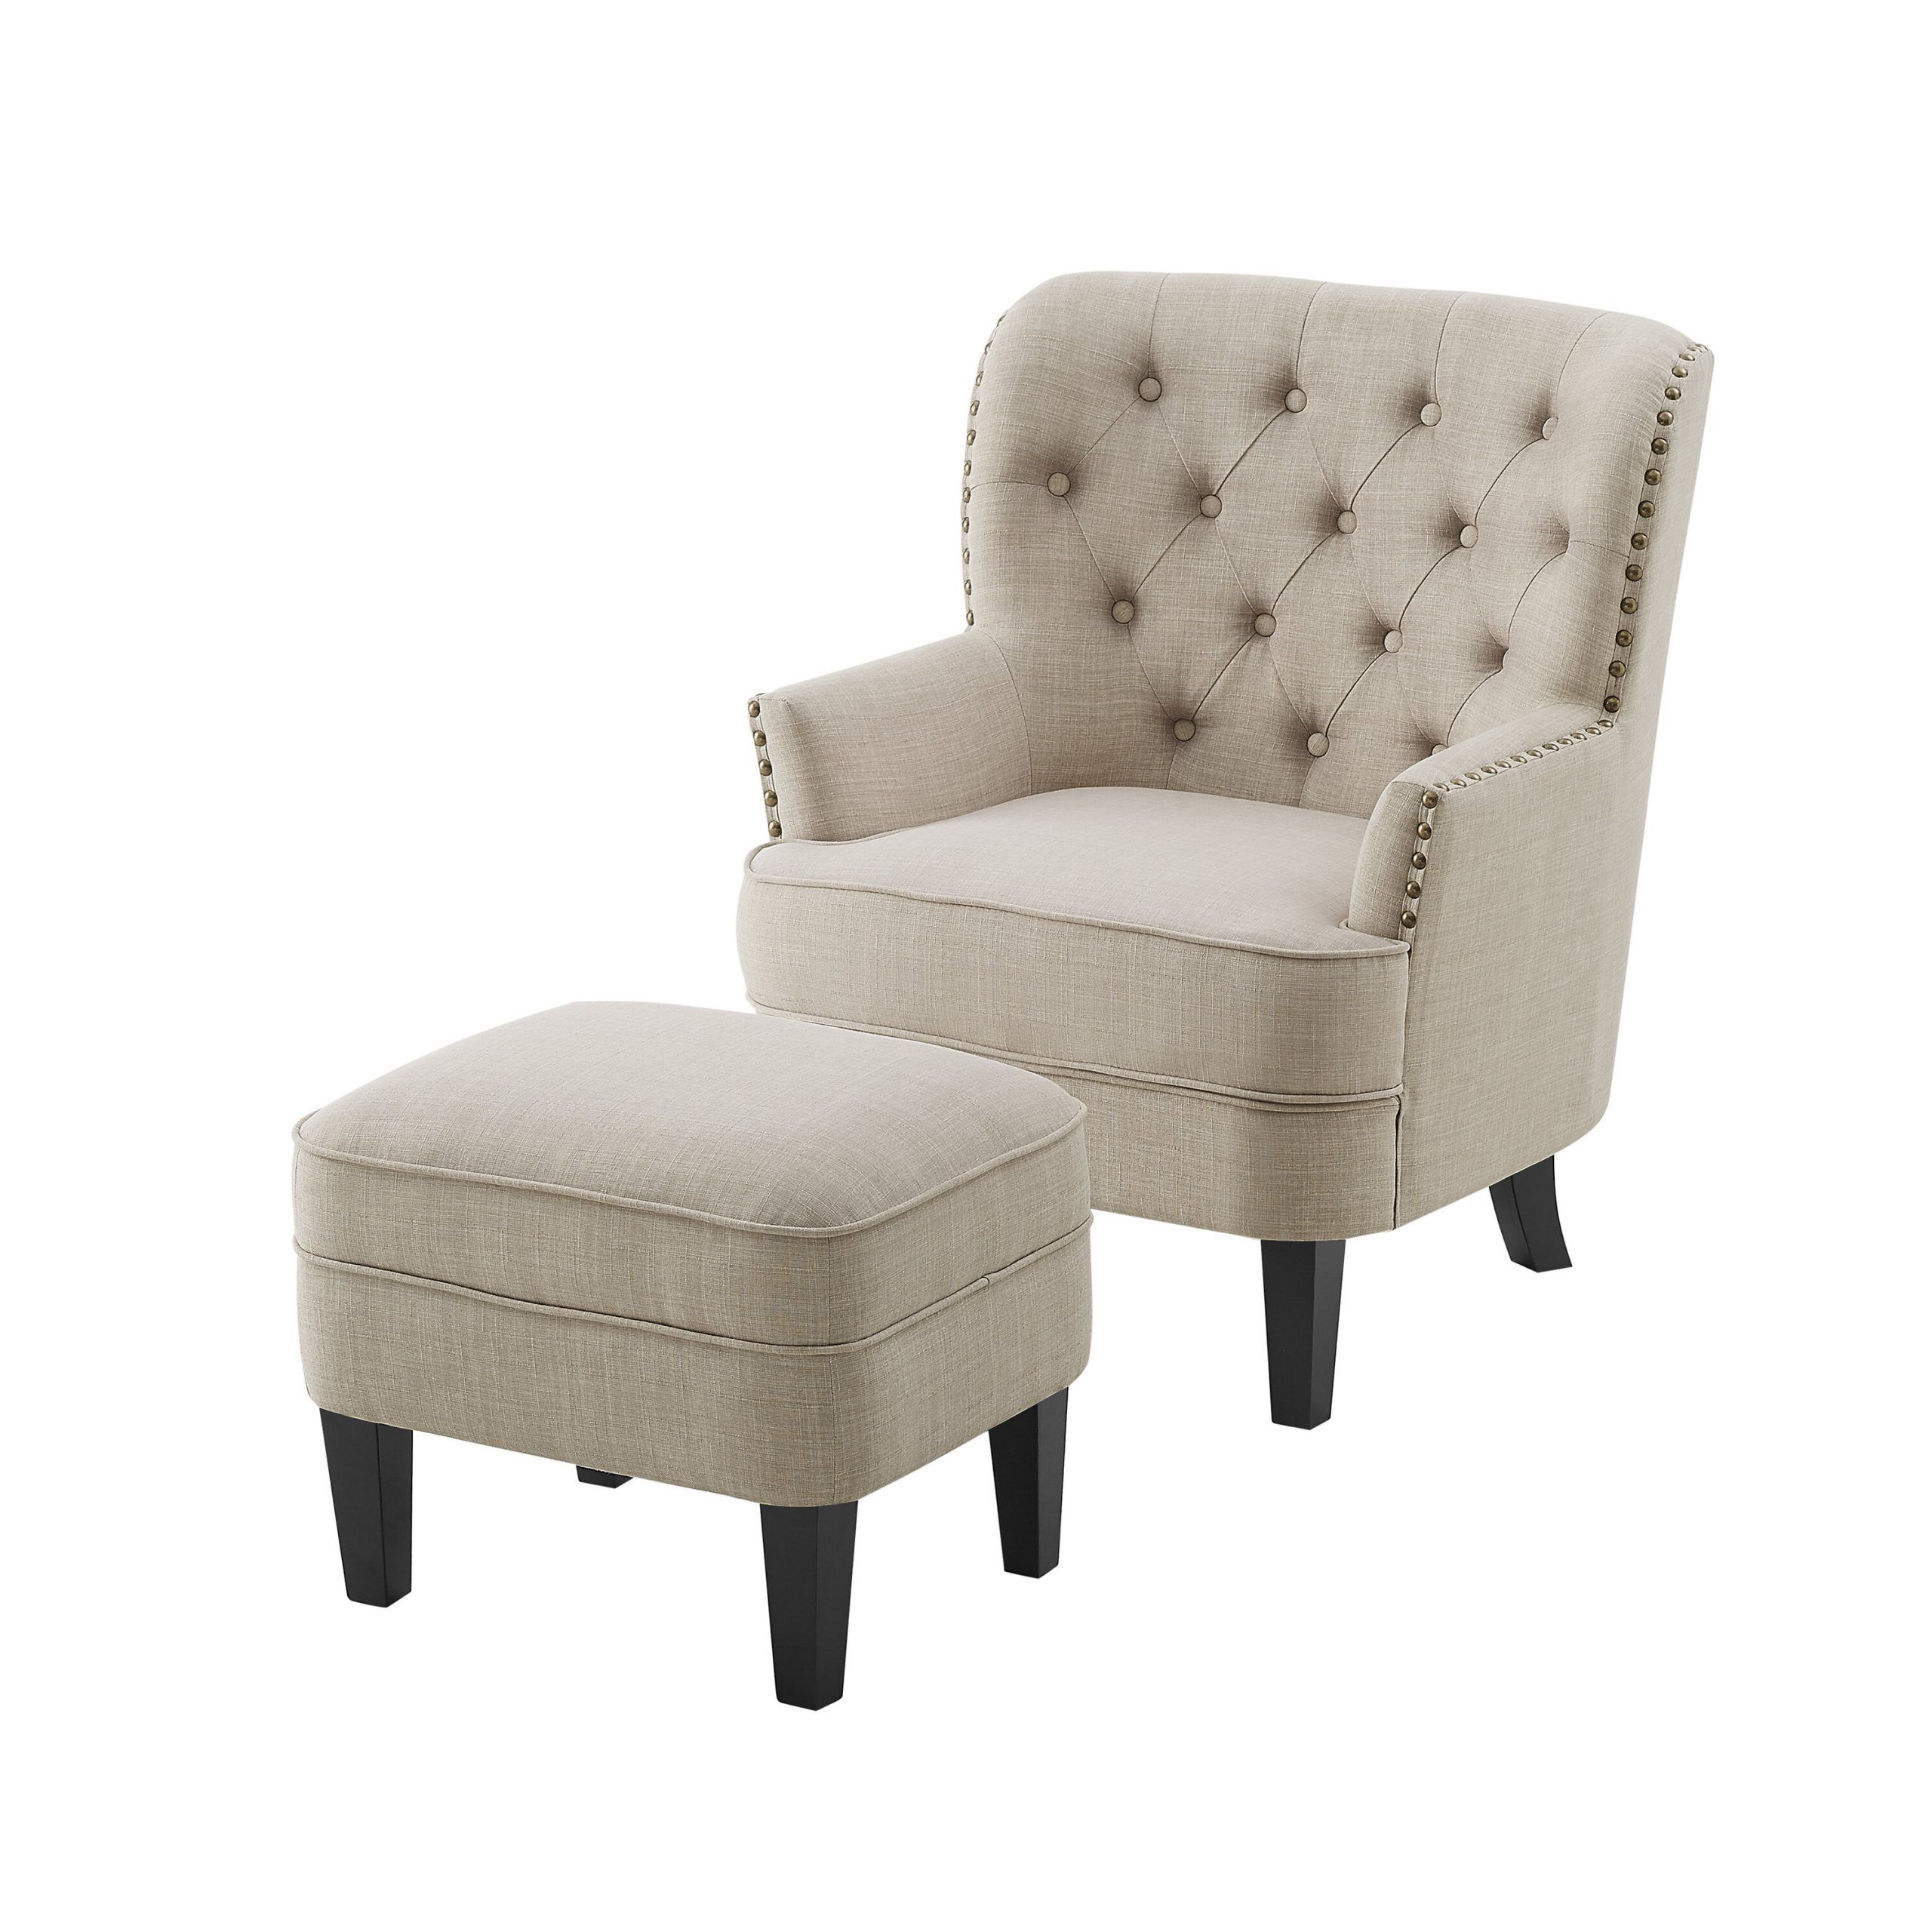 [%accent Chairs | Up To 60% Off Through 01/05 | Wayfair Regarding Current Michalak Cheswood Armchairs And Ottoman|michalak Cheswood Armchairs And Ottoman Inside Widely Used Accent Chairs | Up To 60% Off Through 01/05 | Wayfair|most Current Michalak Cheswood Armchairs And Ottoman Pertaining To Accent Chairs | Up To 60% Off Through 01/05 | Wayfair|best And Newest Accent Chairs | Up To 60% Off Through 01/05 | Wayfair Inside Michalak Cheswood Armchairs And Ottoman%] (View 17 of 20)